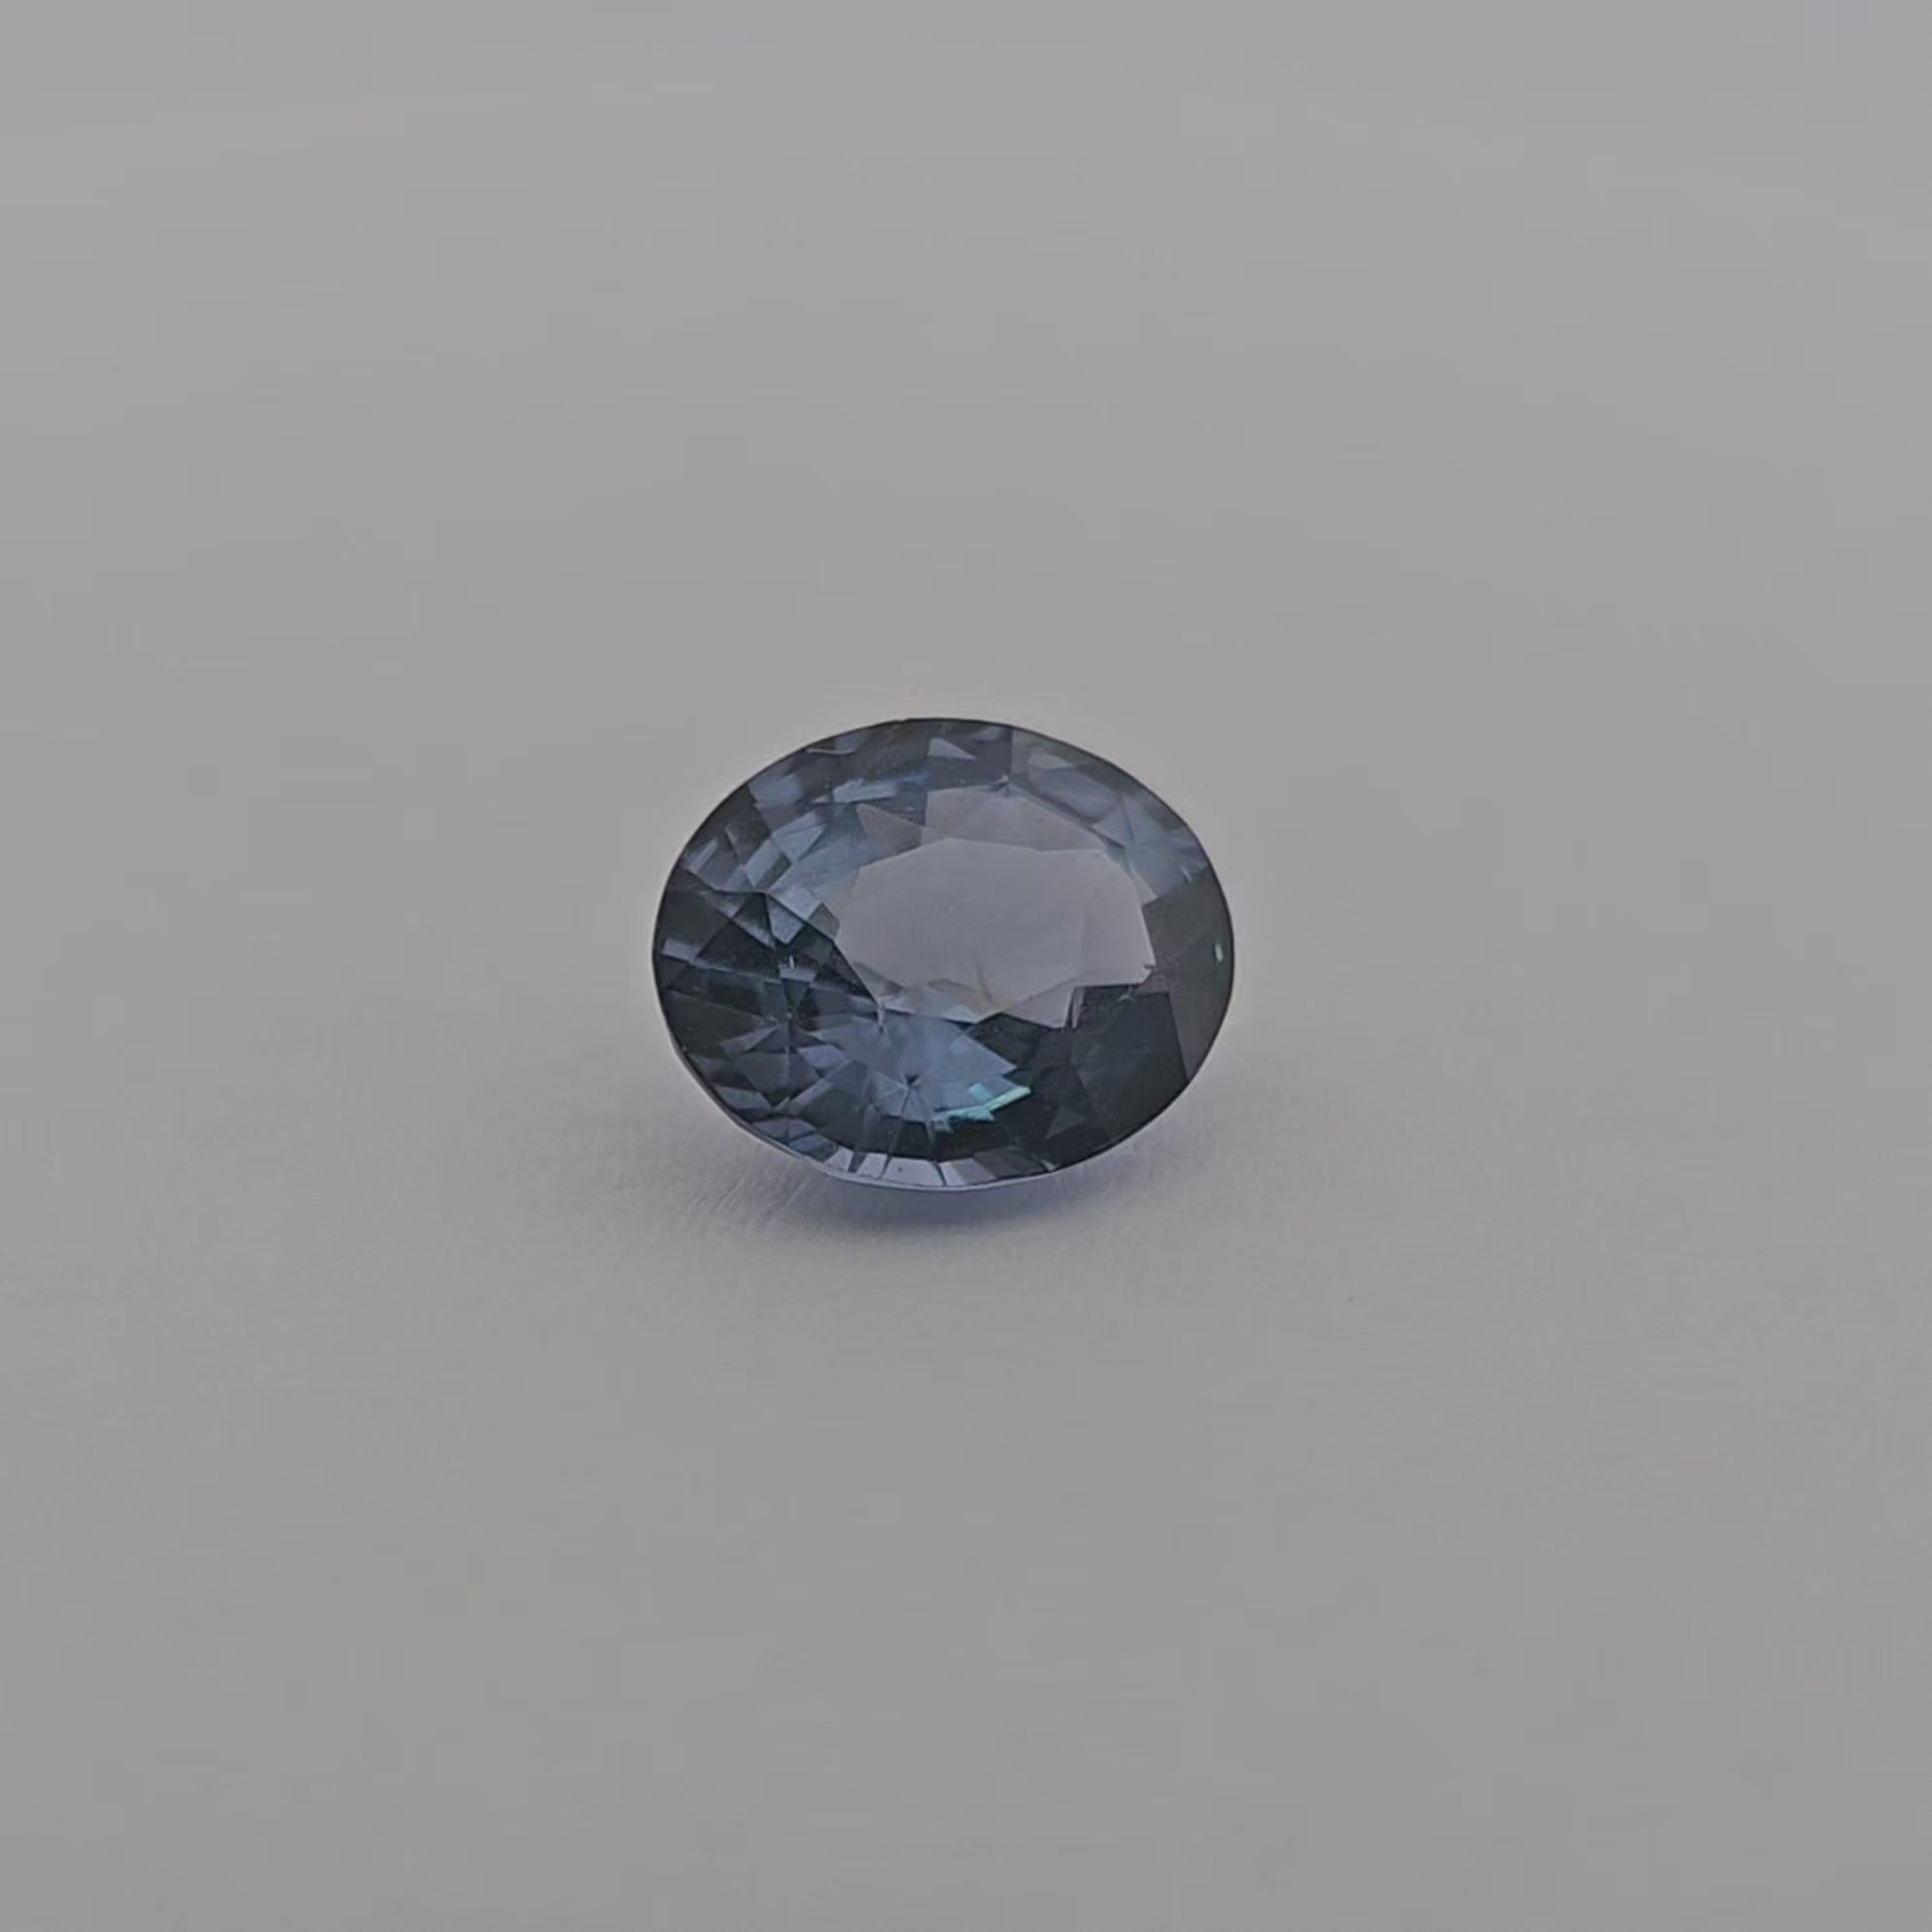 loose Natural Blue Spinel Stone 3.34 Carats Oval Shape (10.12 x 8.34 x 5.41 mm)]